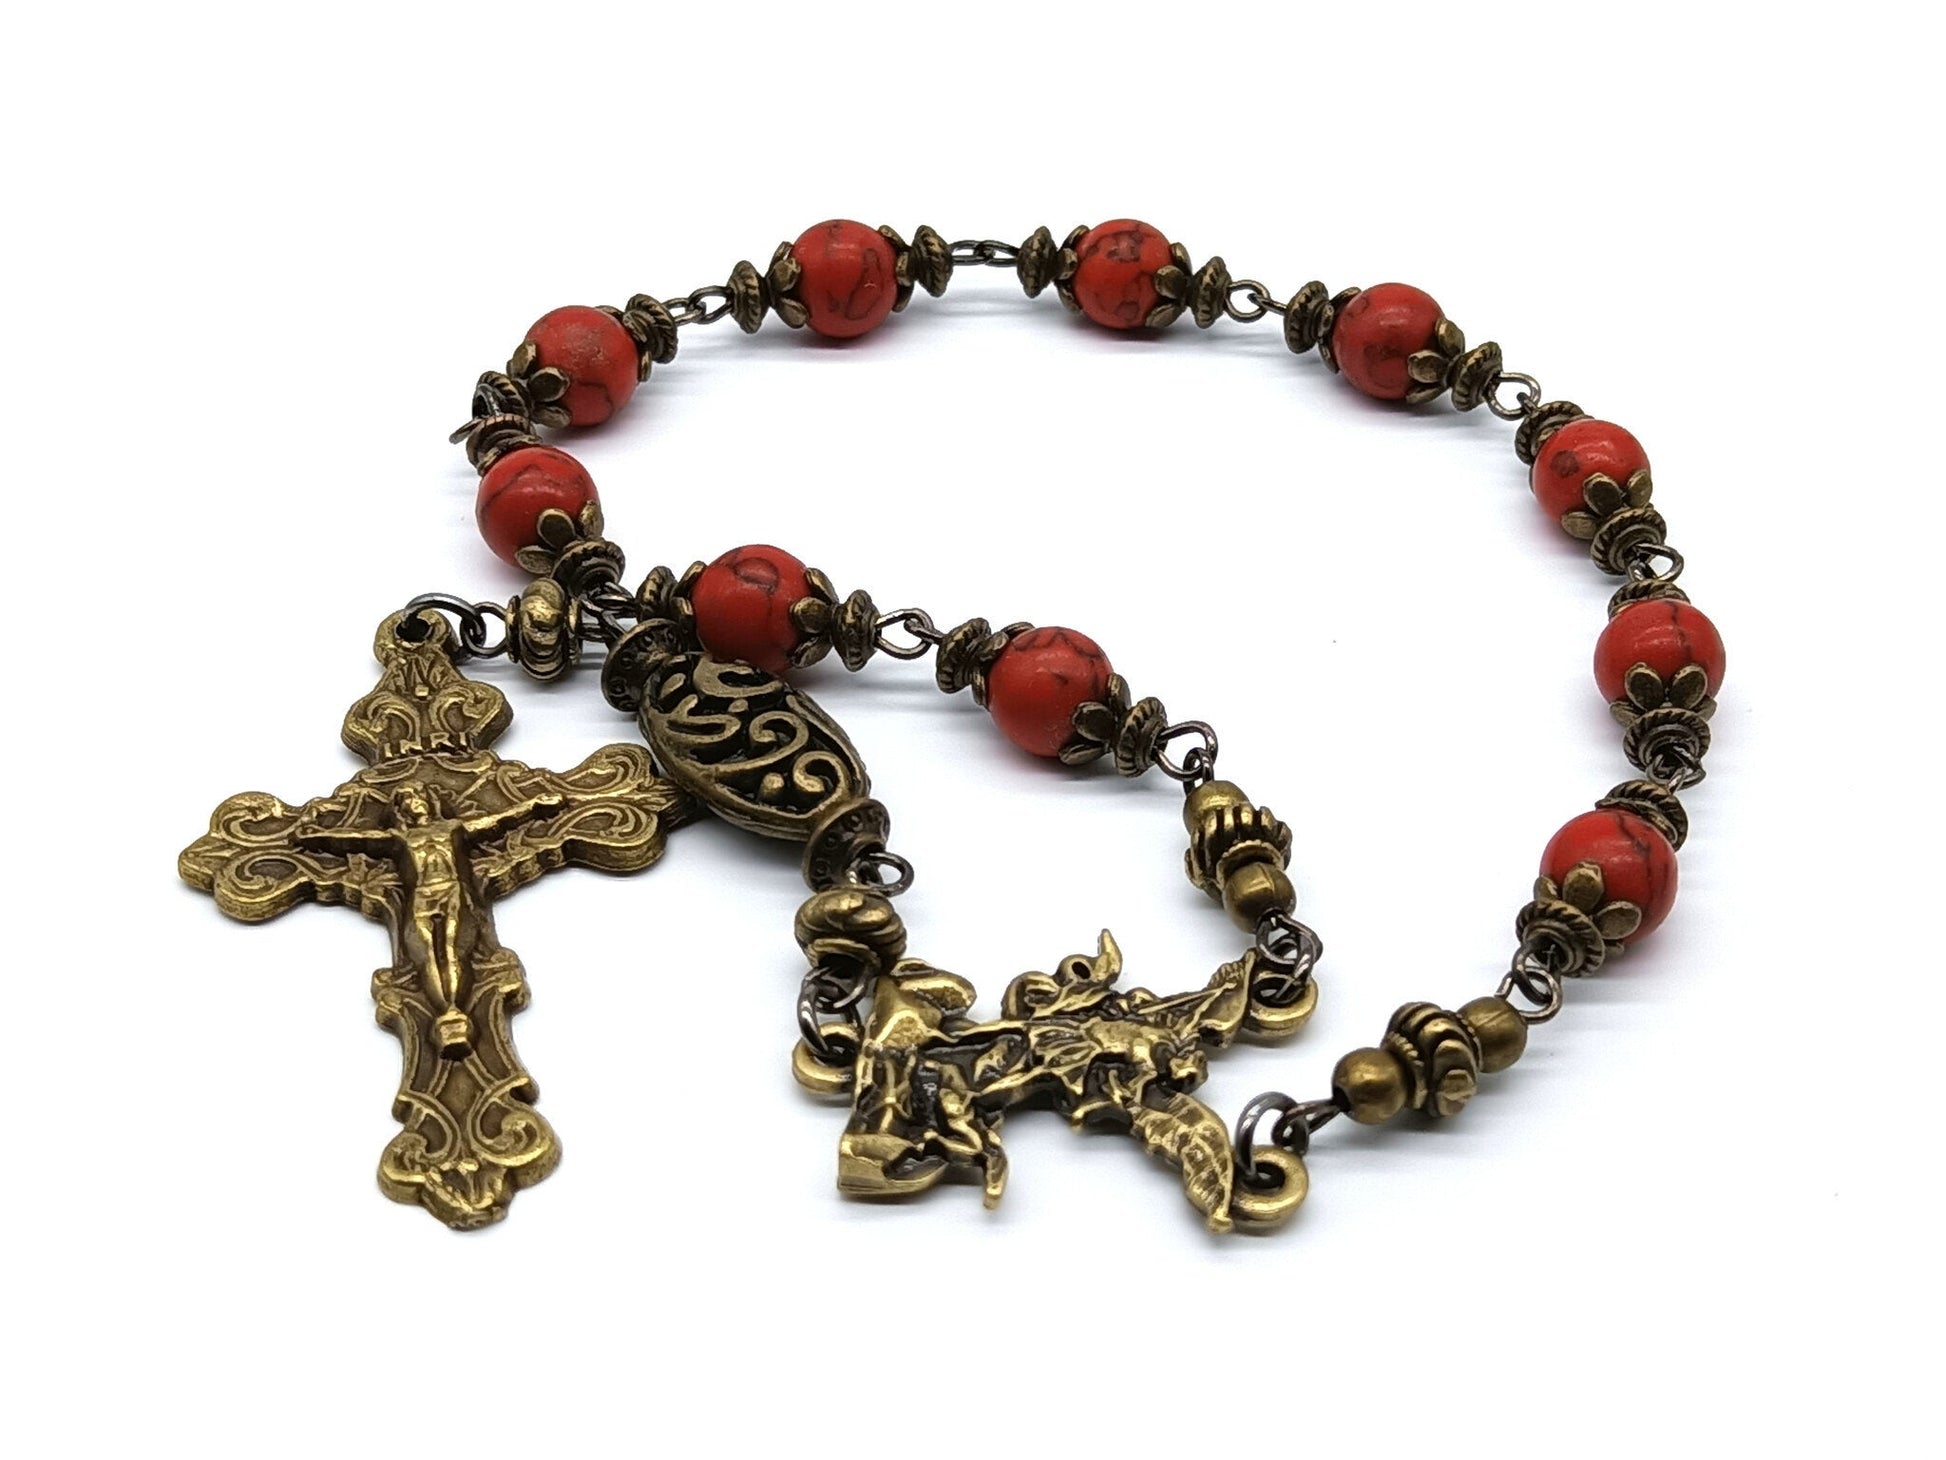 Saint Michael unique rosary beads single decade with bloodstone gemstone beads, bronze crucifix, St. Michael centre medal and bead caps.